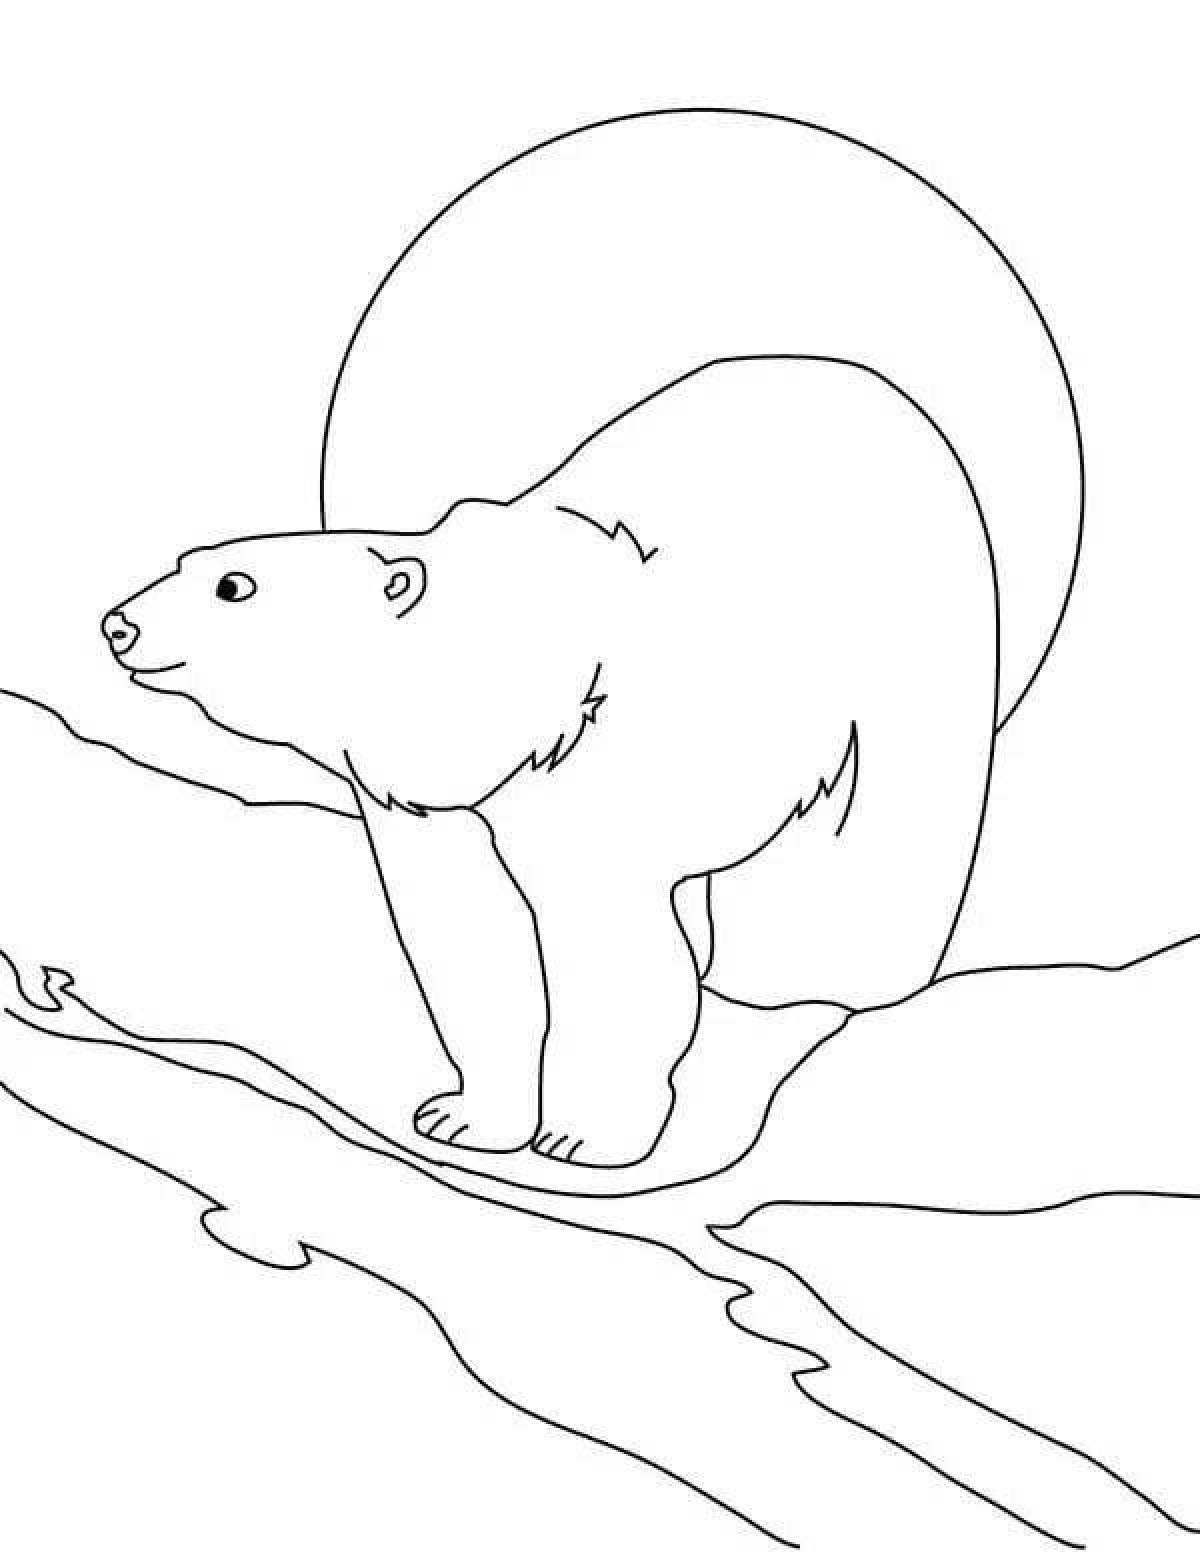 Live coloring for children 4-5 years old animals of the north